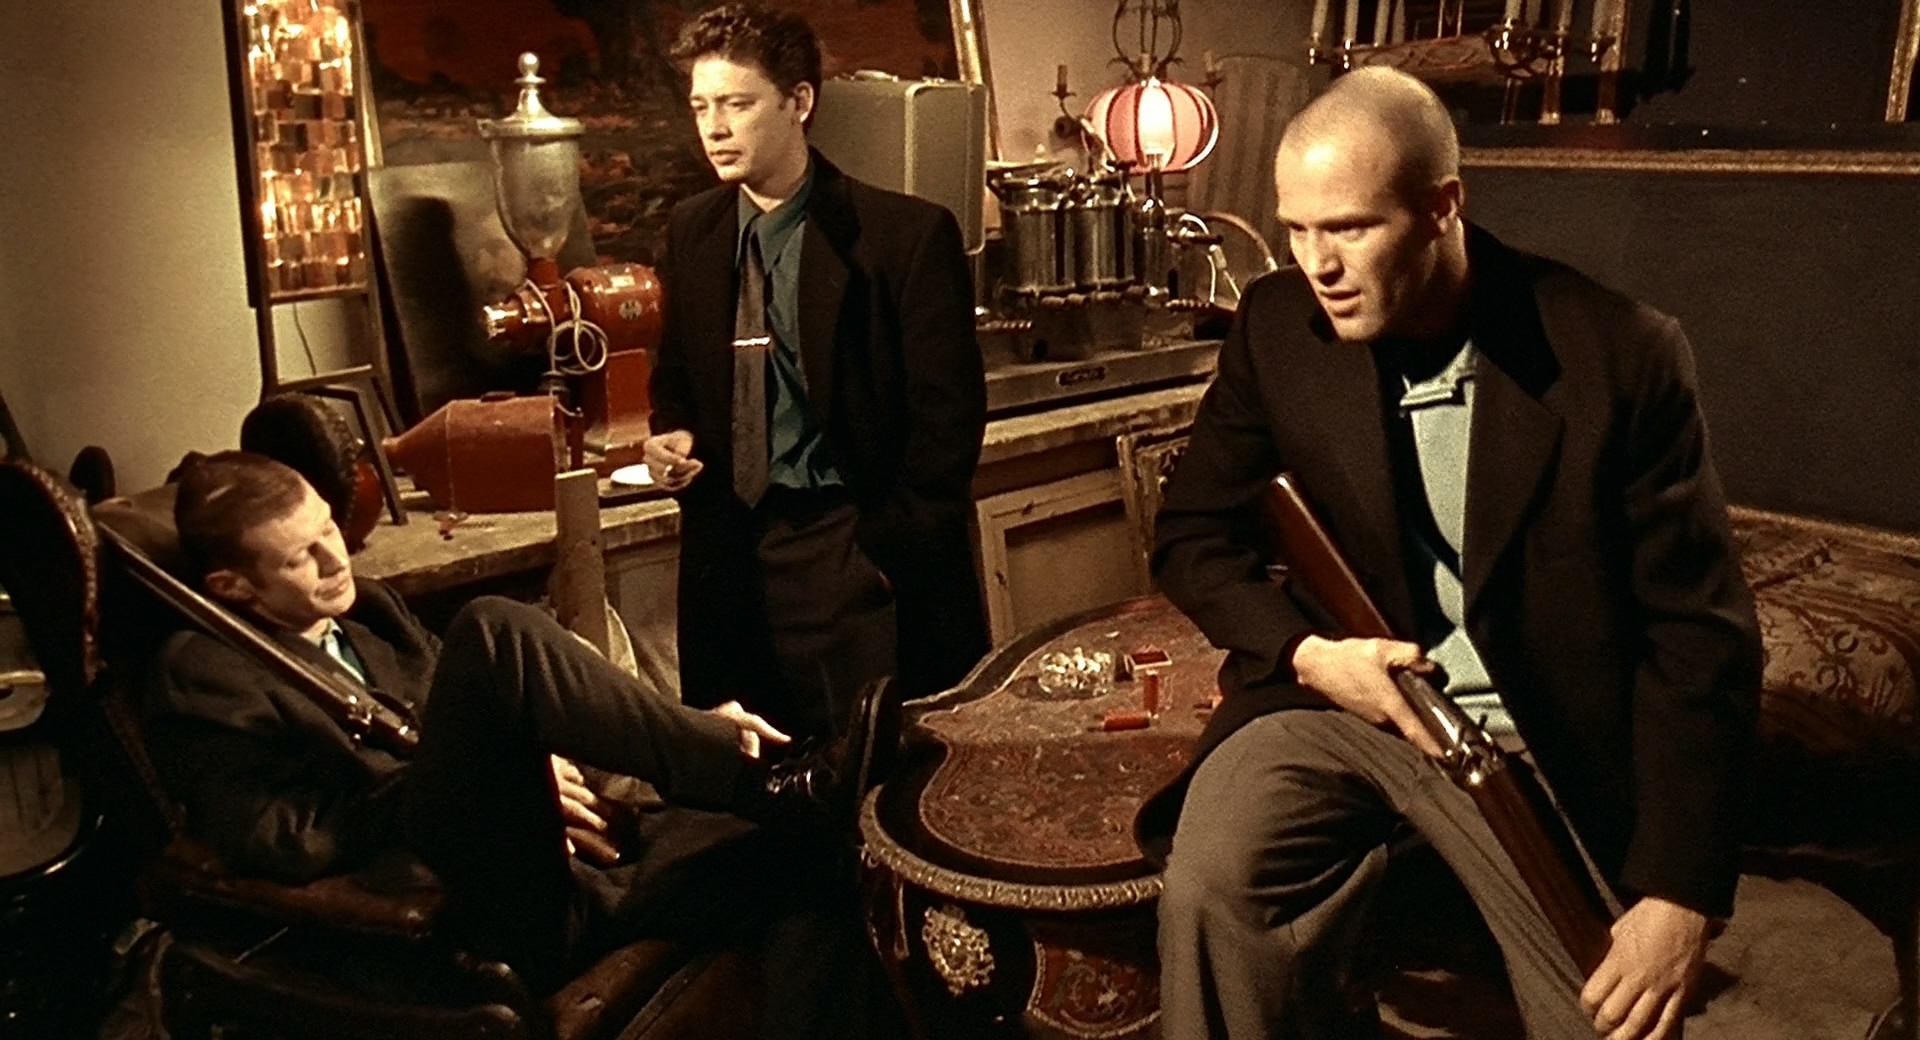 Lock, Stock And Two Smoking Barrels #10